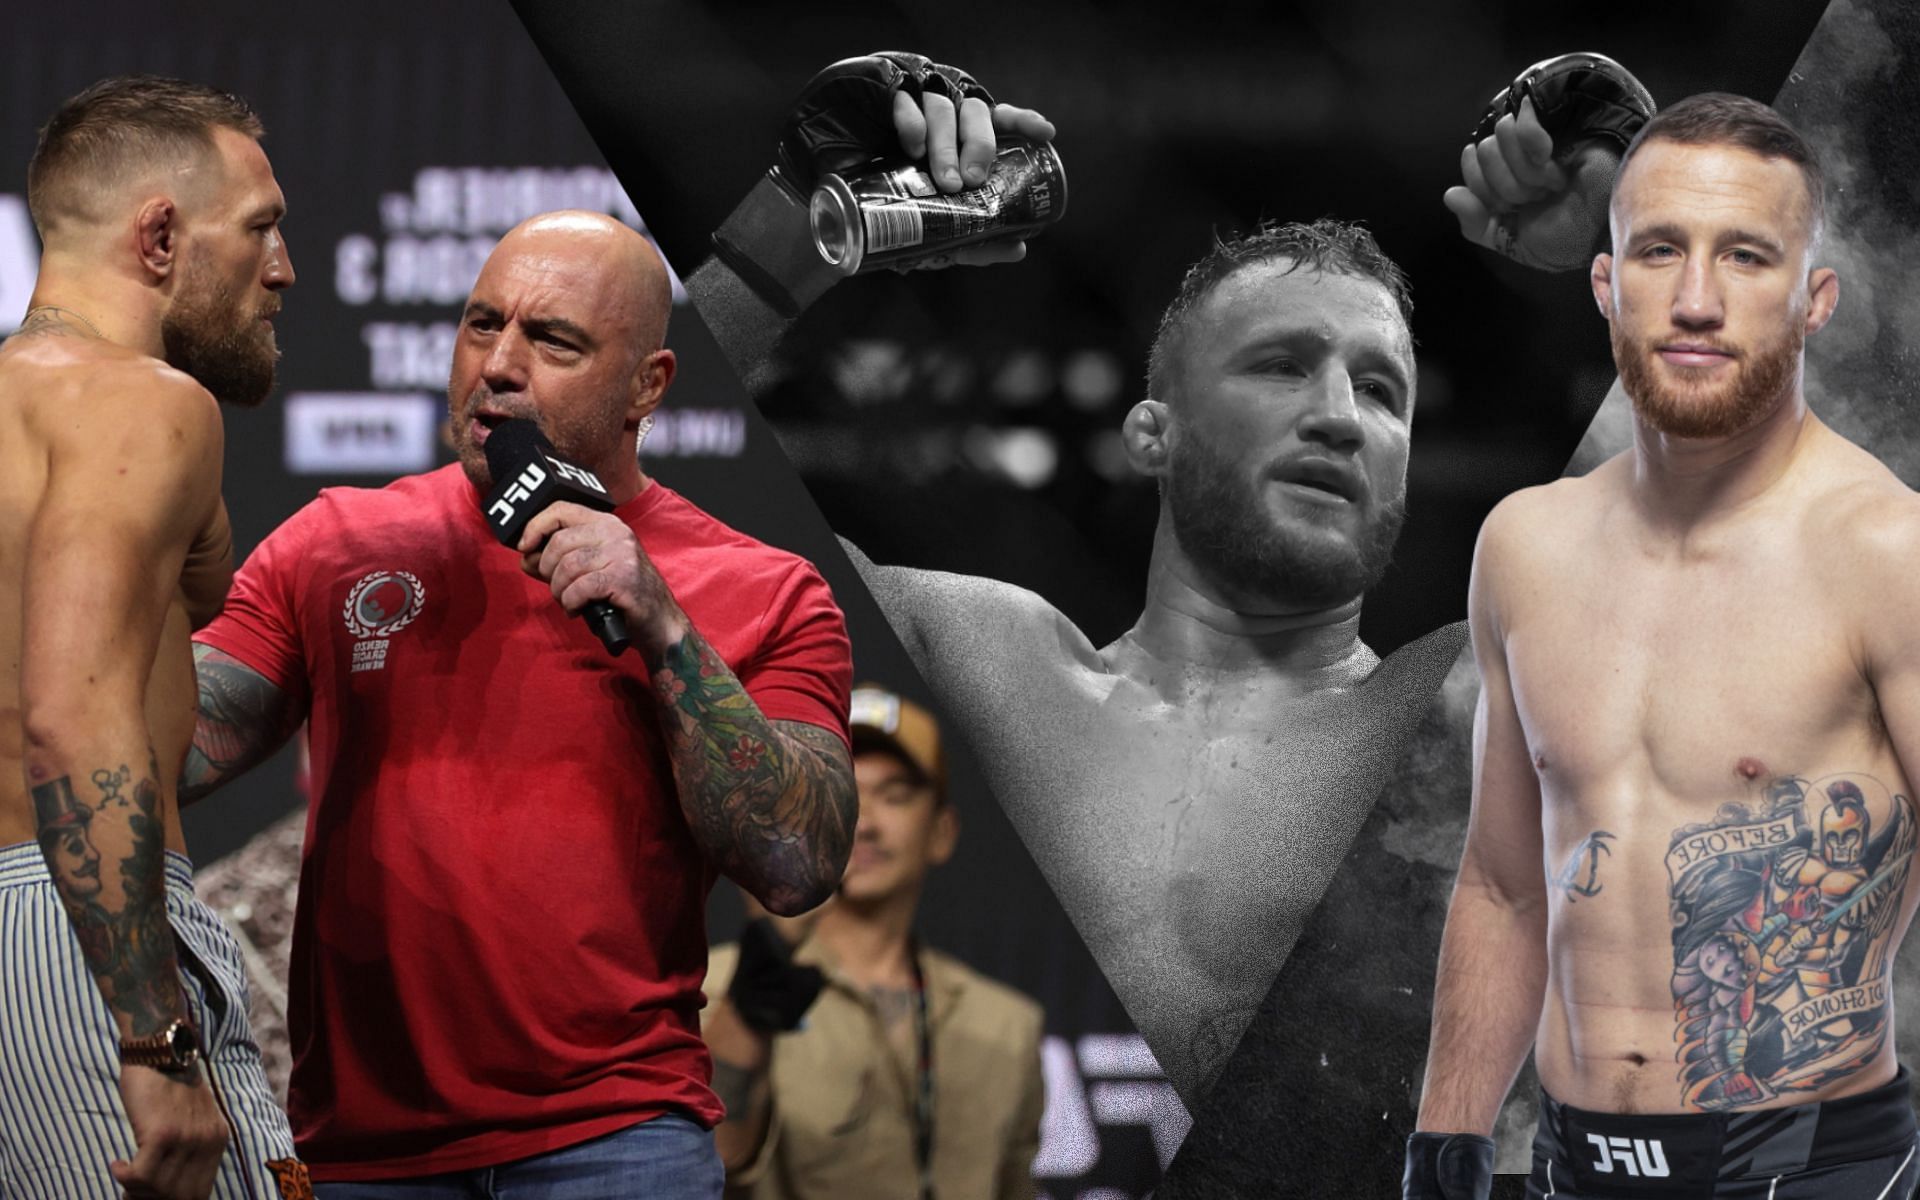 Conor McGregor and Joe Rogan(left), Justin Gaethje (middle) and (right. Image credit: UFC.com)